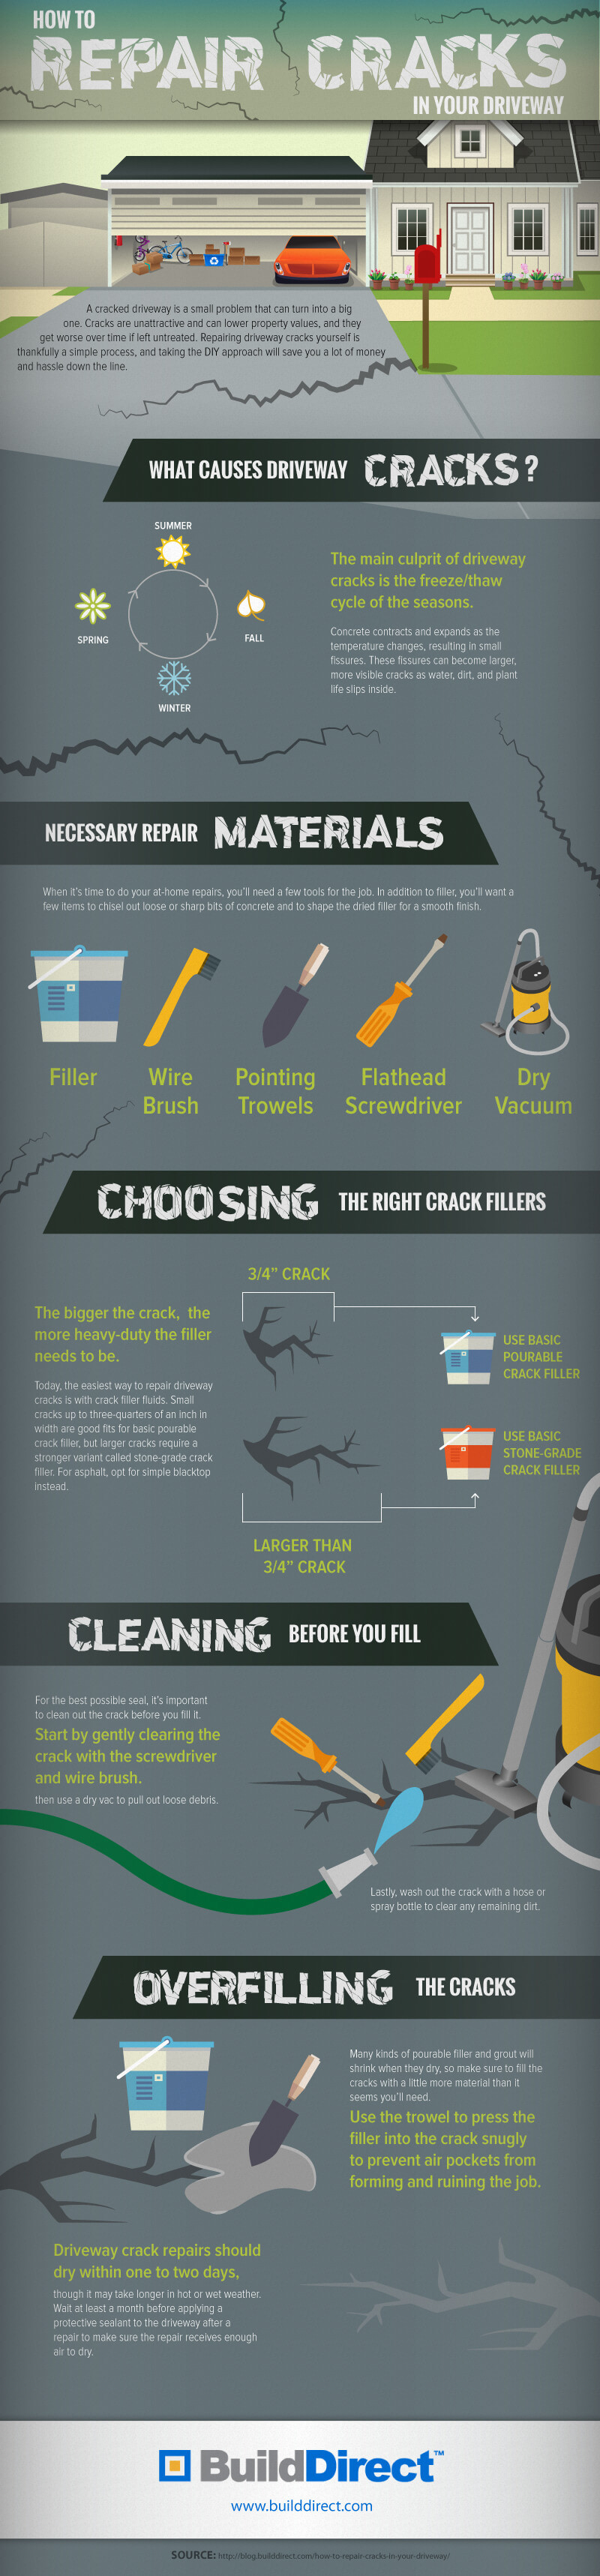 28 Elegant How to Repair Cracked Glass Vase 2024 free download how to repair cracked glass vase of lovely filling cracks in concrete driveway bestconcrete cf intended for driveway repair an infographic